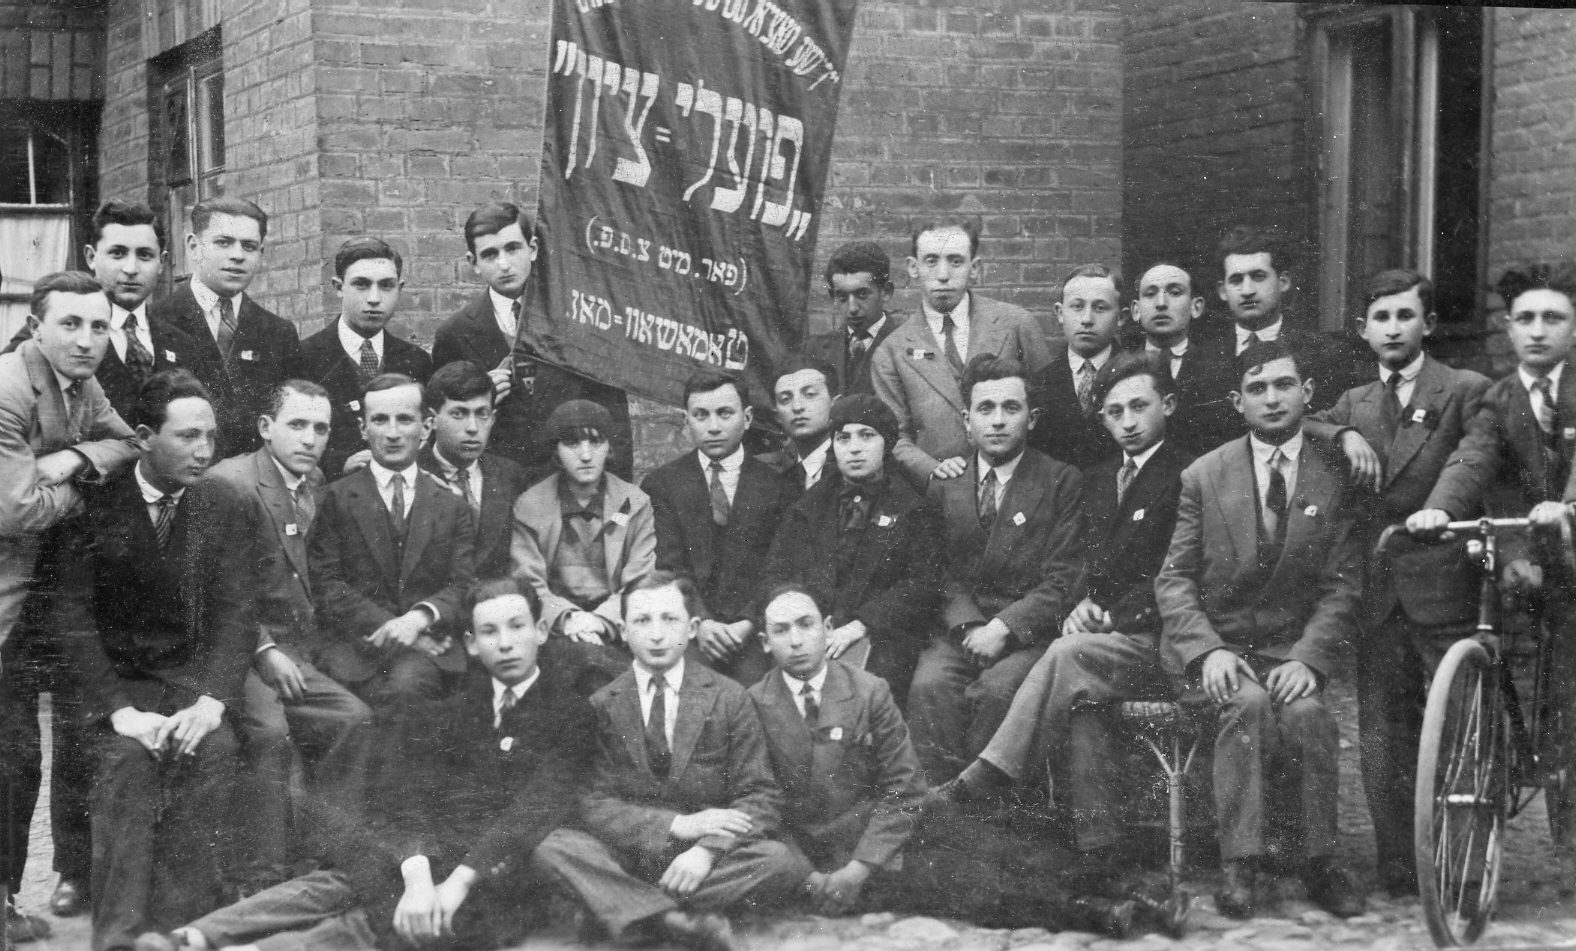 Machel Grossman, seated middle row second from the right, with his Zionist youth group, approx. 1932.